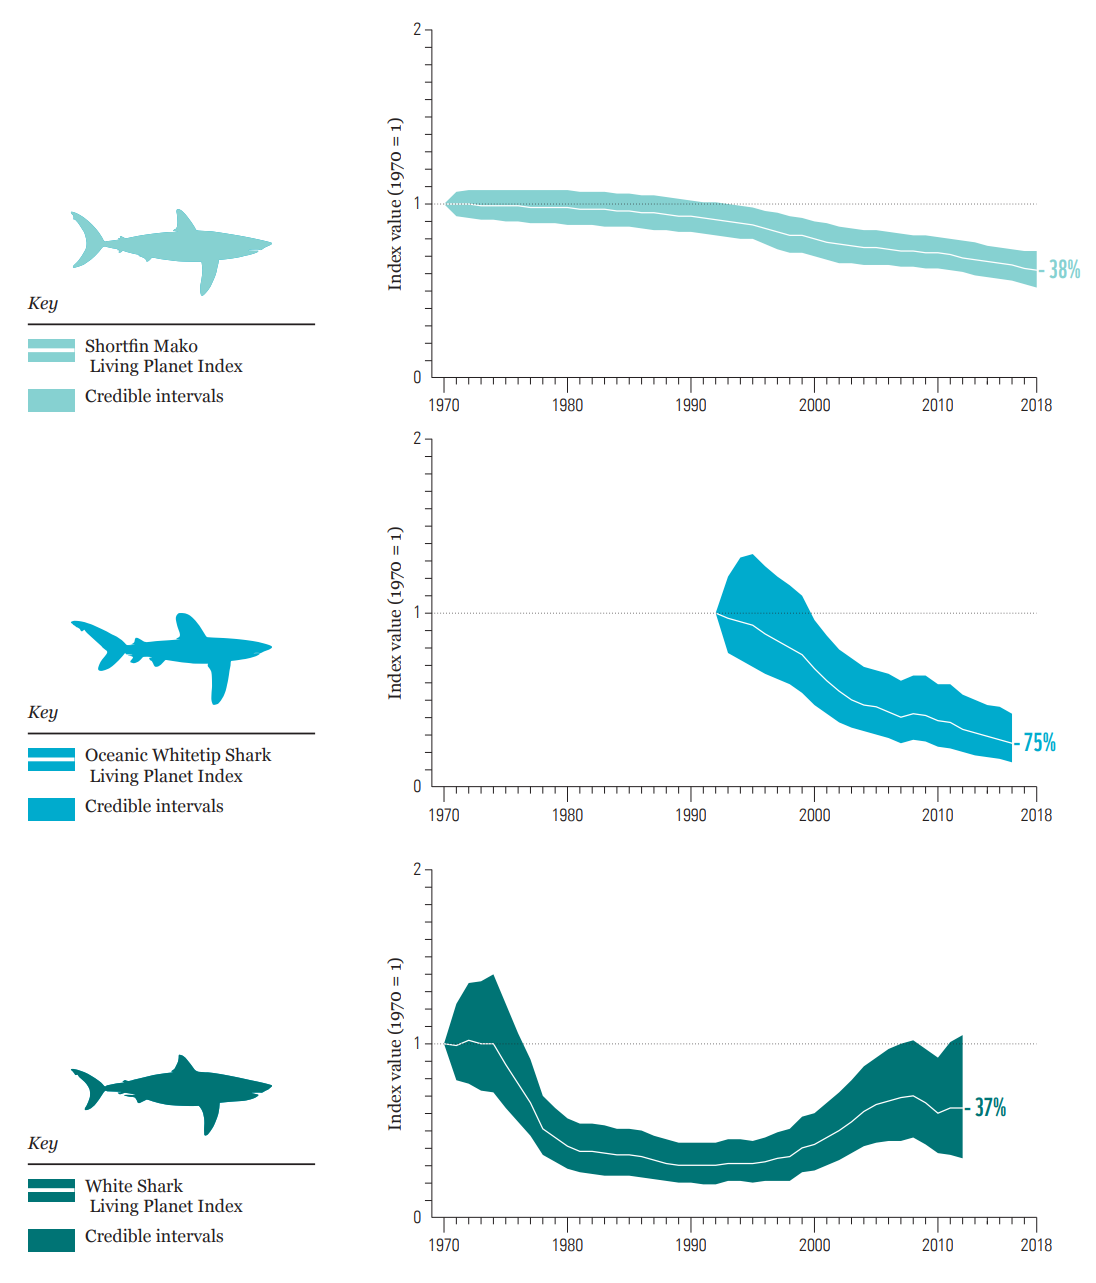 Living Planet Index, 1970-2018 for three species of oceanic sharks. Some formerly abundant, wide-ranging shark species have declined so steeply that they now fall into the two highest threat categories on the IUCN Red List. For example, the commercially valuable Shortfin Mako shark was recently classified as Endangered, while the iconic oceanic Whitetip Shark is now considered Critically Endangered. White Shark numbers had declined on average by an estimated 70 percent worldwide over the last five decades, but they are now recovering in several regions, including off both coasts of the US (where their retention has been banned since the mid-1990s). Data: Pacoureau, et al., 2021. Graphic: WWF / ZSL